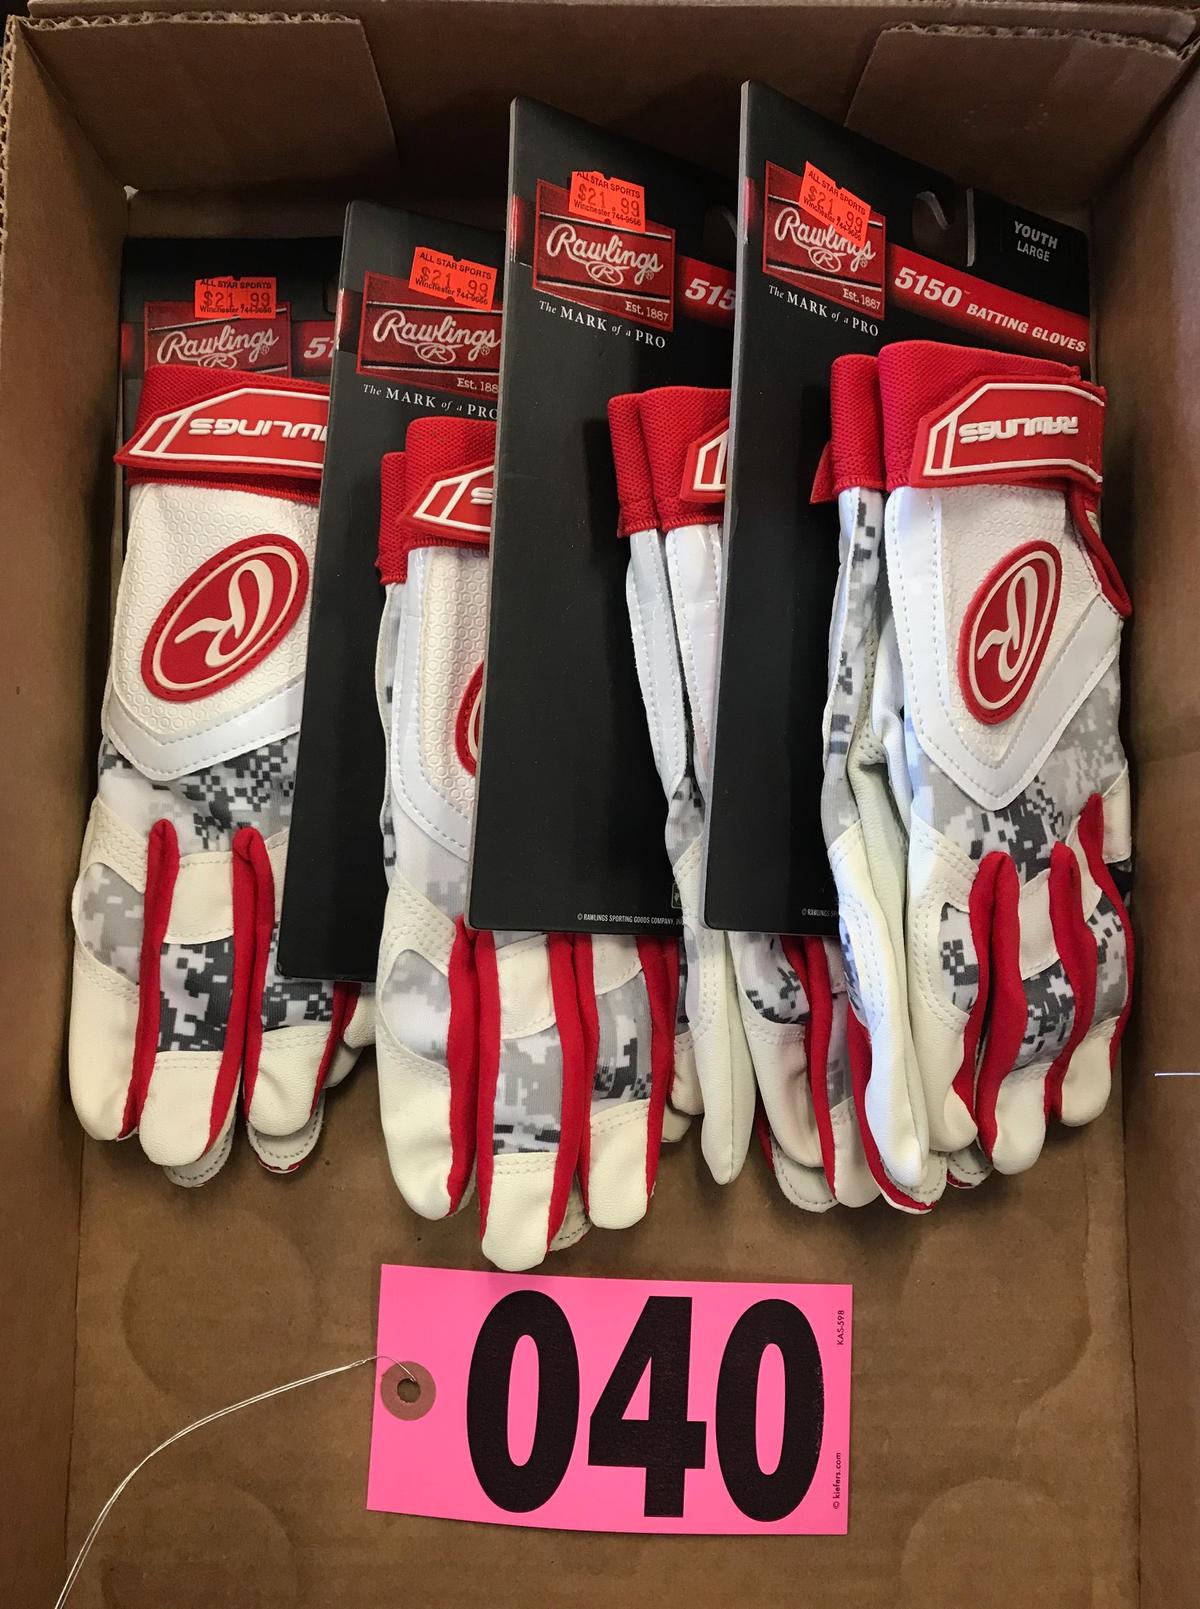 (4) Youth large batting gloves, red/white